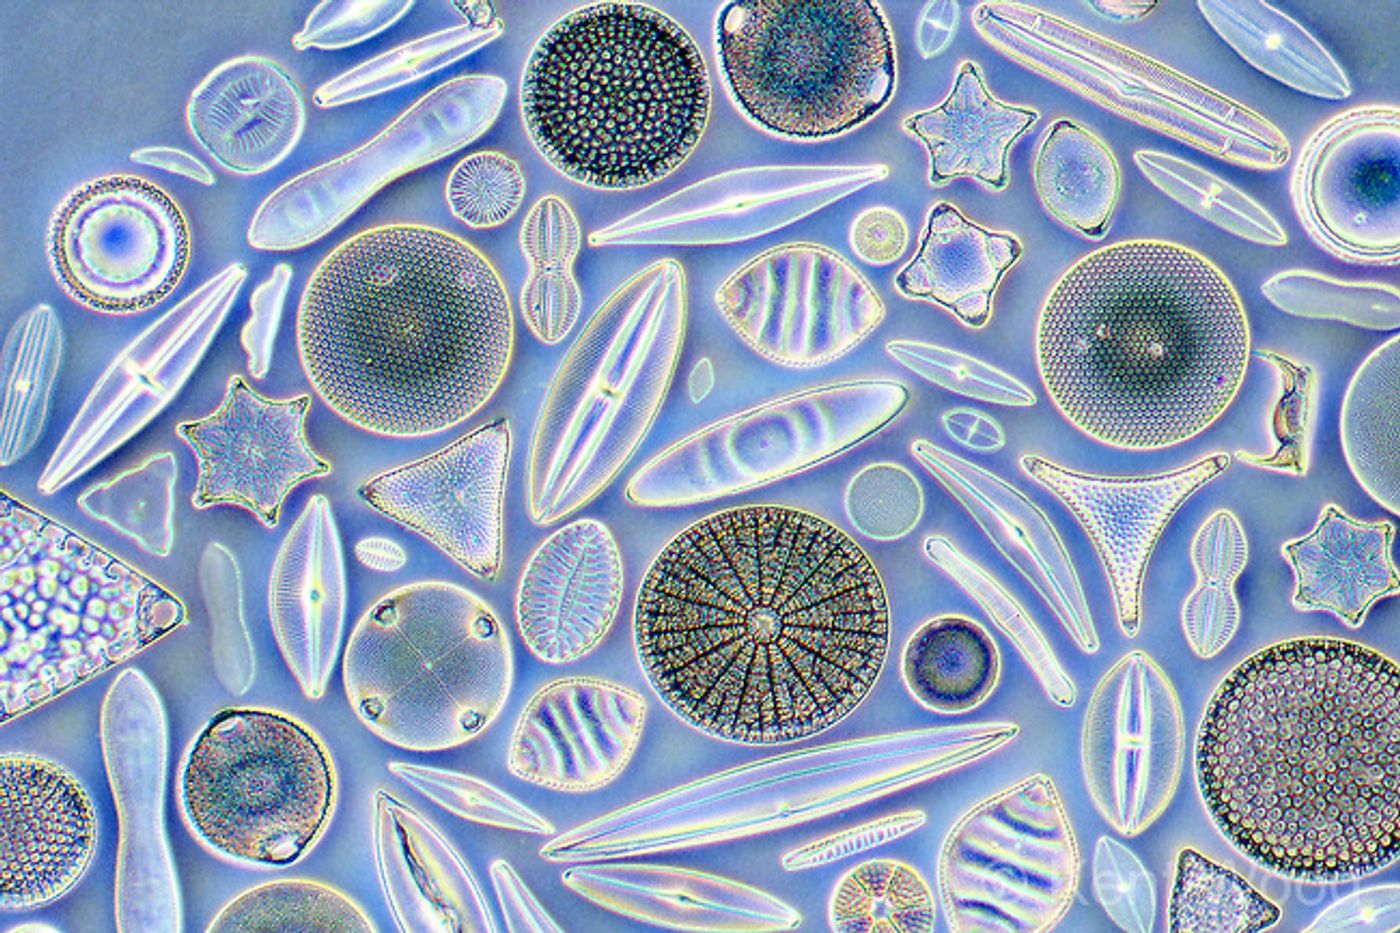 Diatoms come in all shapes and sizes.